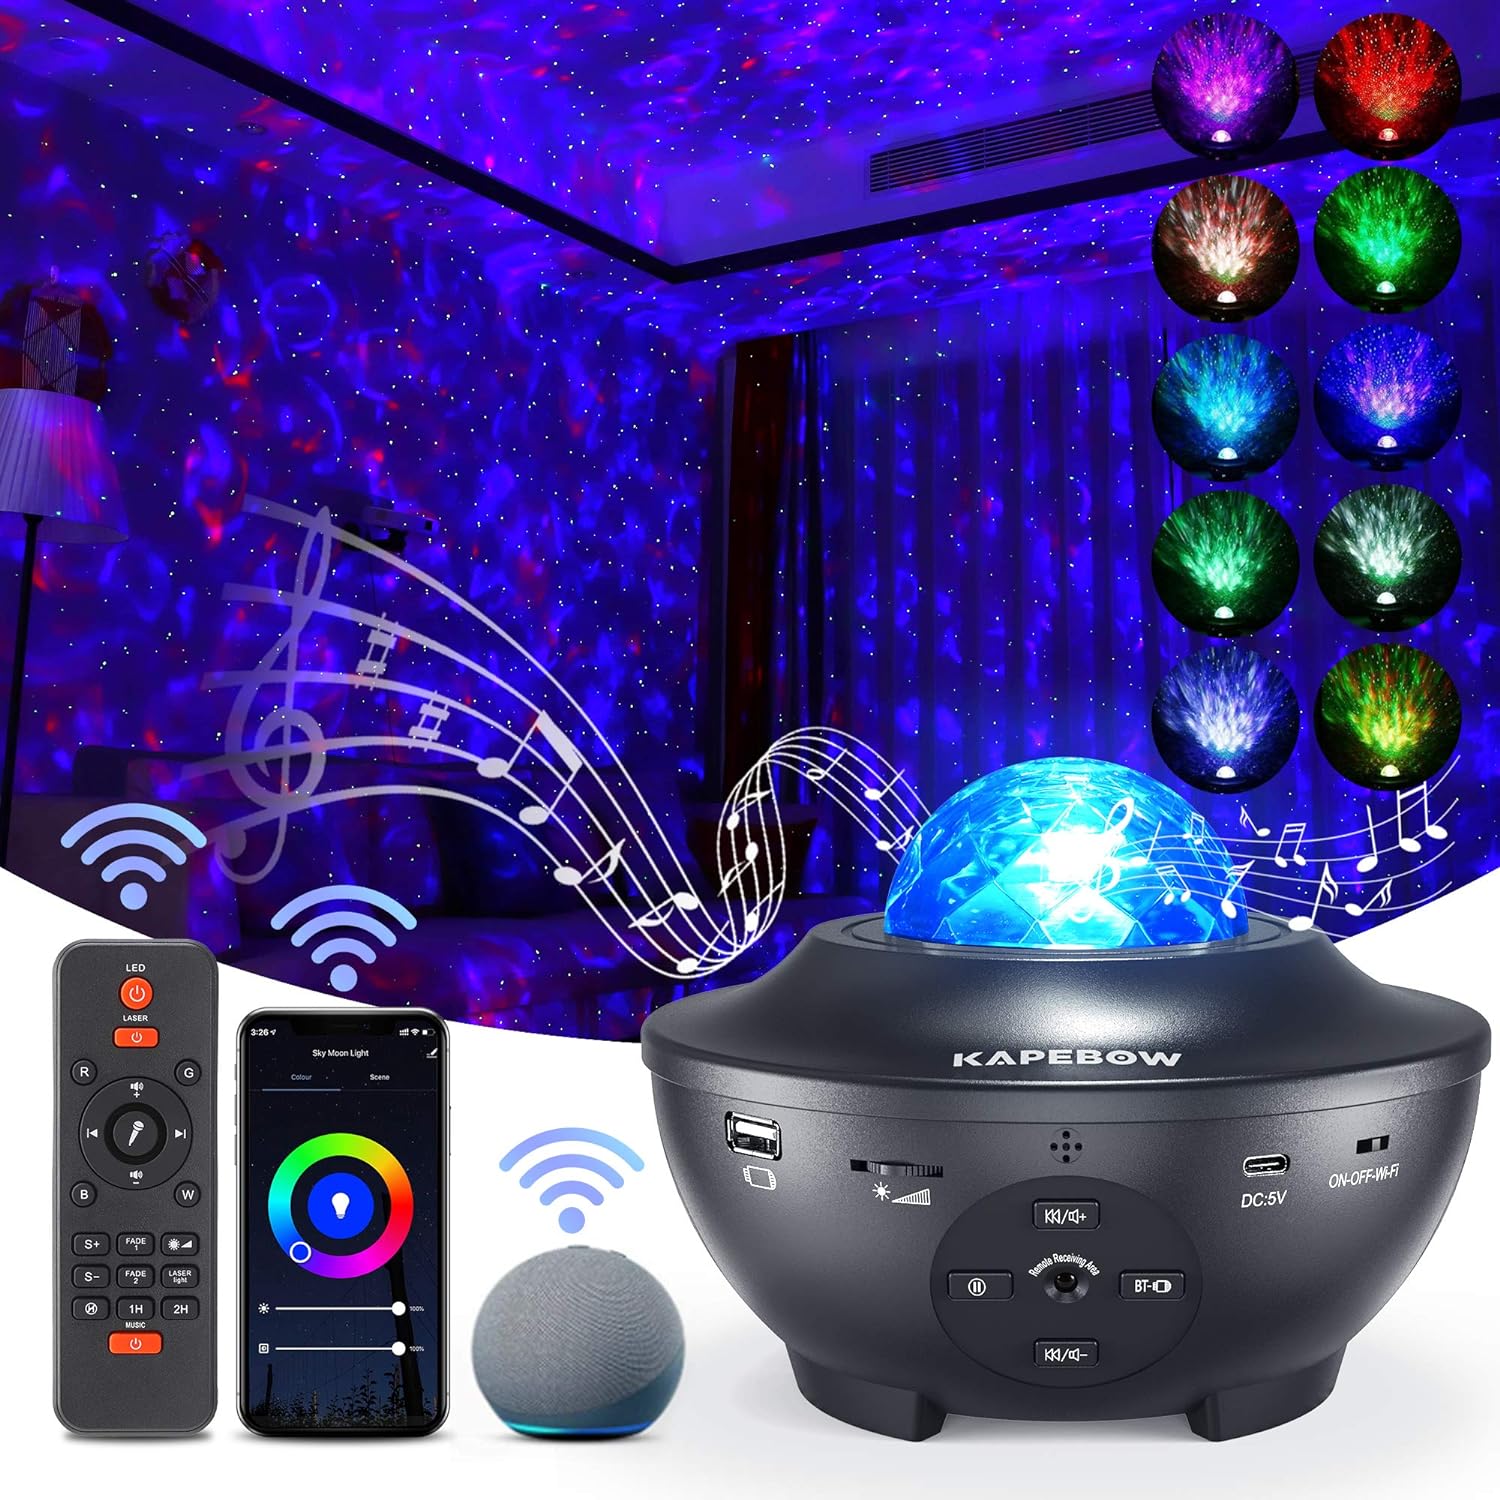 Kapebow Star Projector, Galaxy Night Light Working with Smart App